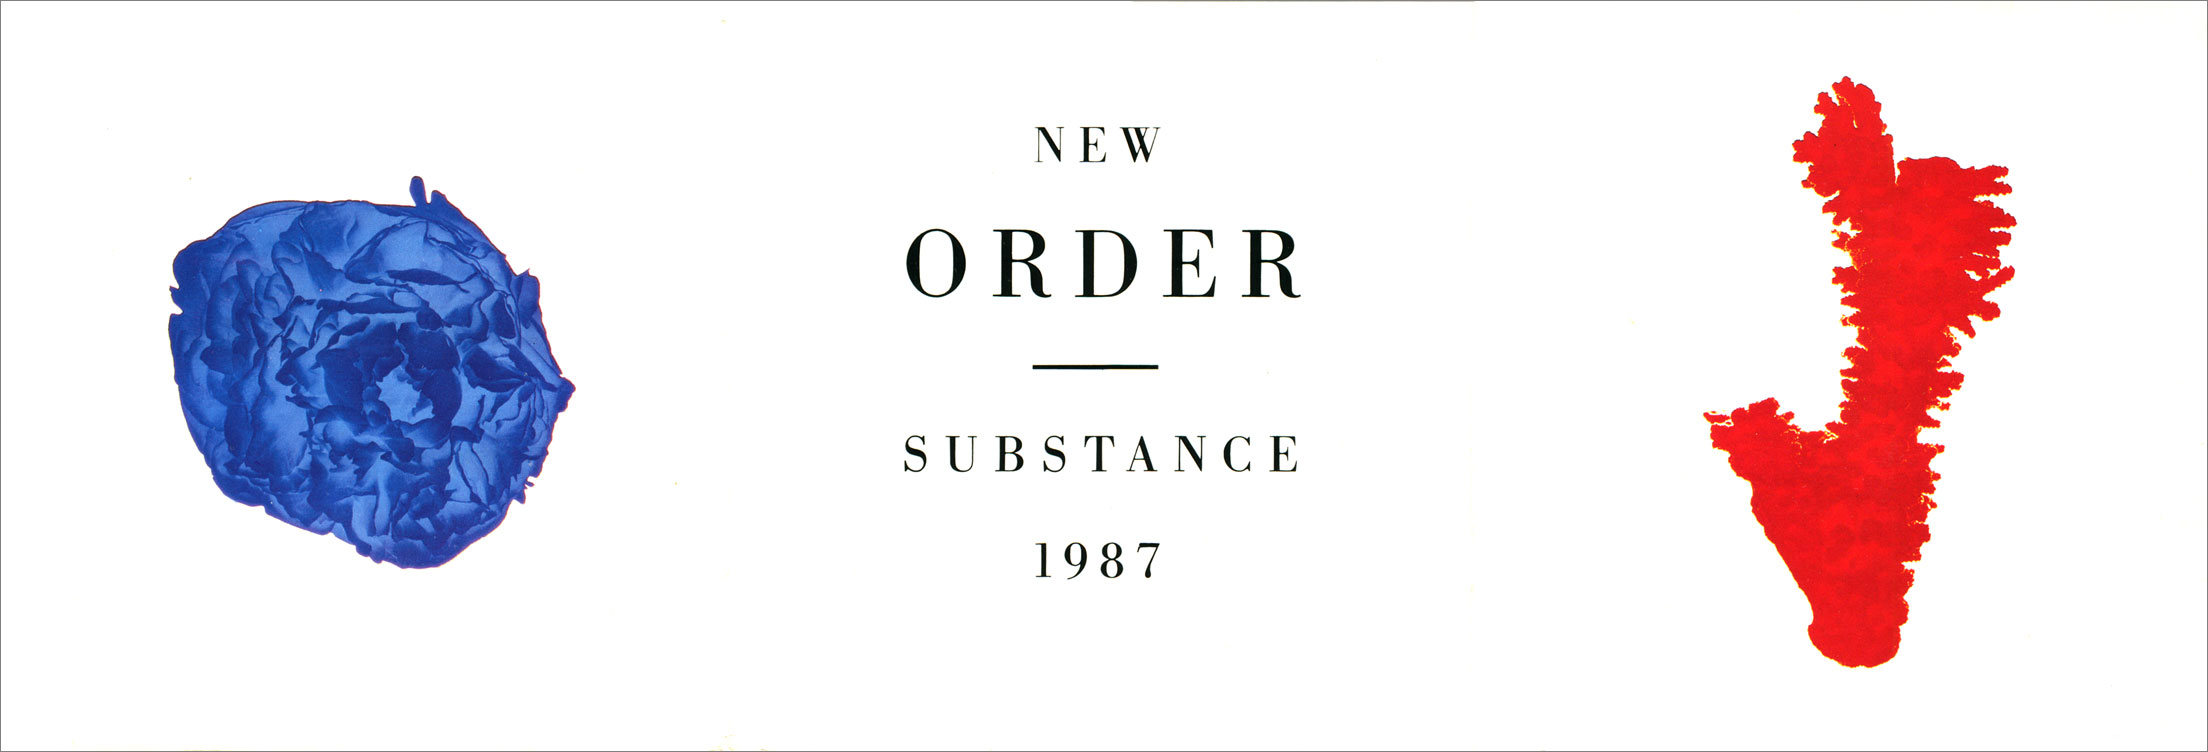 Have you new order. New order substance 1987. New order substance. New order Россия 1987. Шрифт the New order.